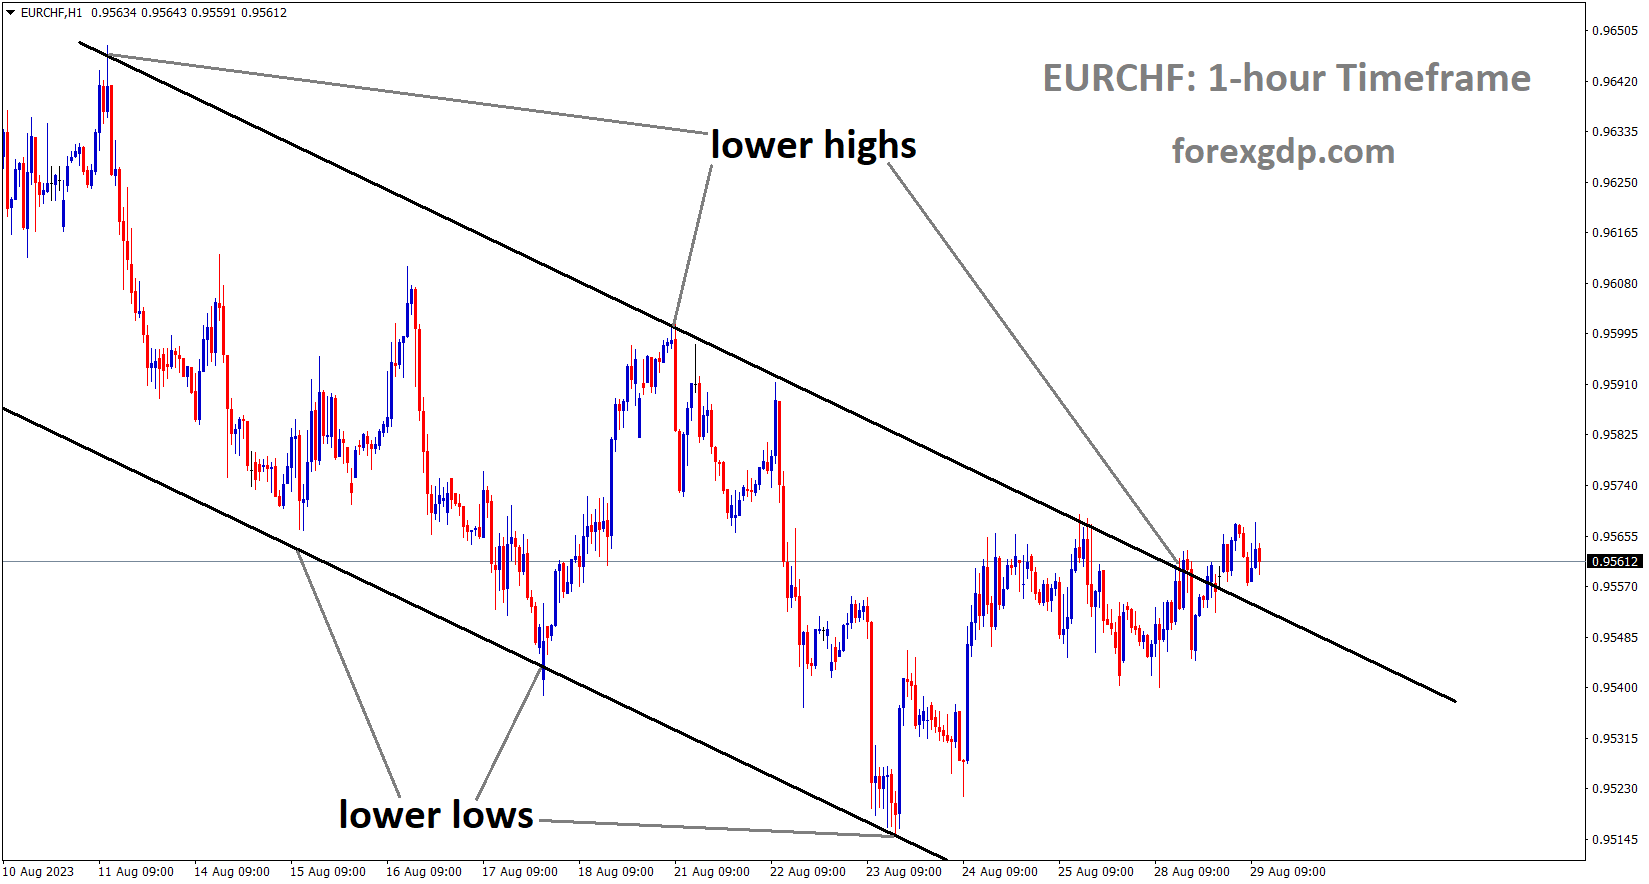 EURCHF is moving in the Descending channel and the market has reached the lower high area of the channel